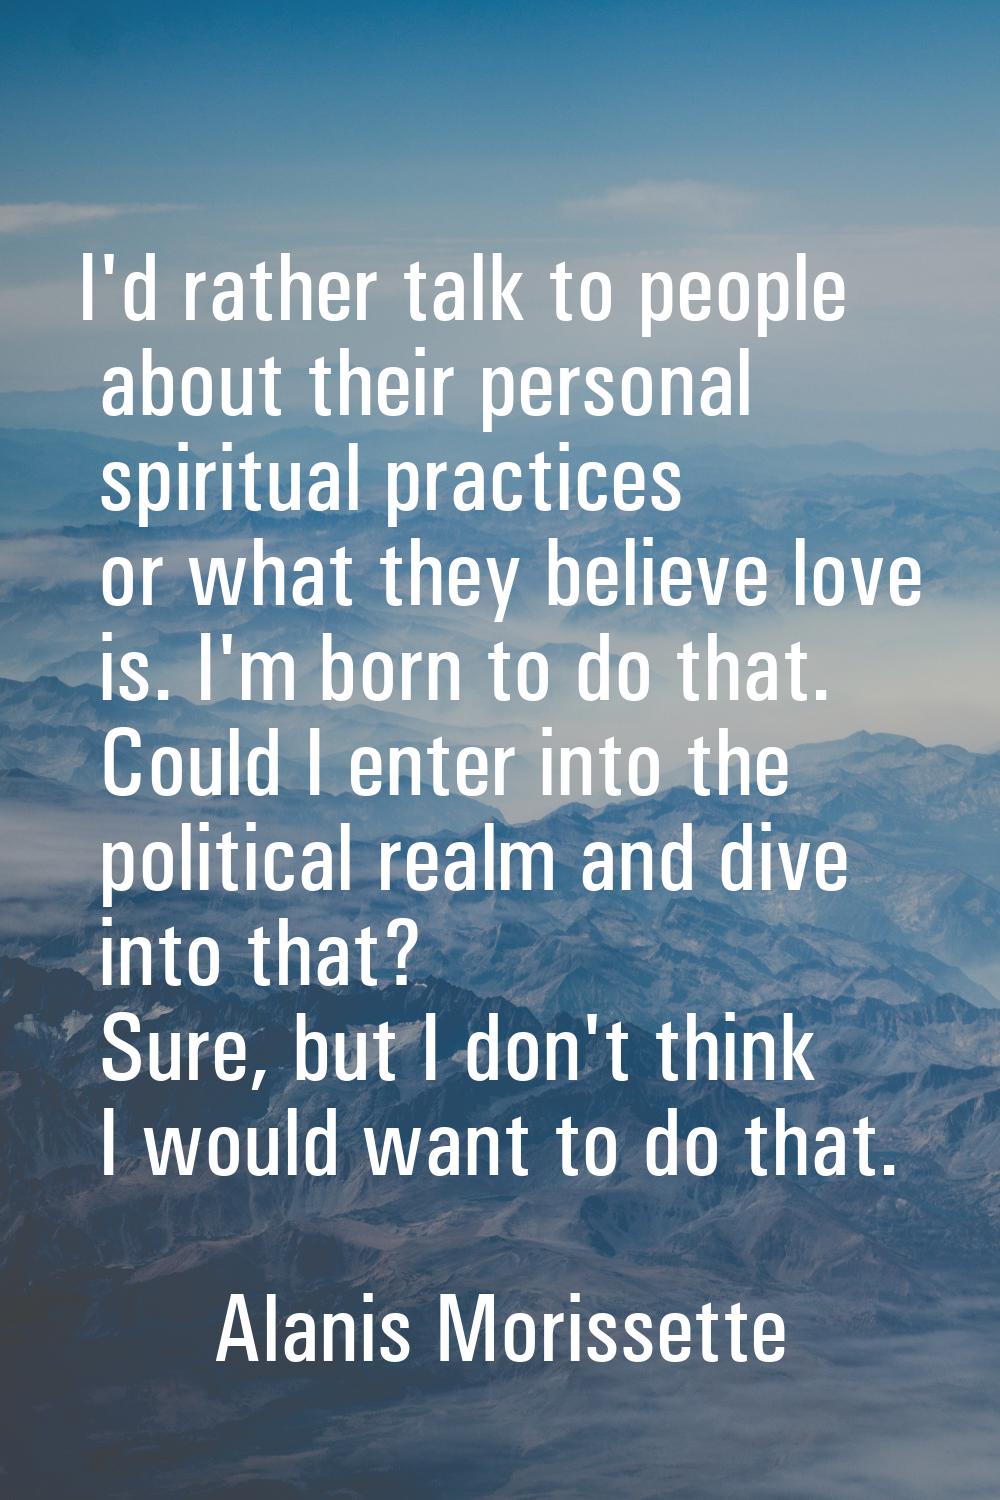 I'd rather talk to people about their personal spiritual practices or what they believe love is. I'